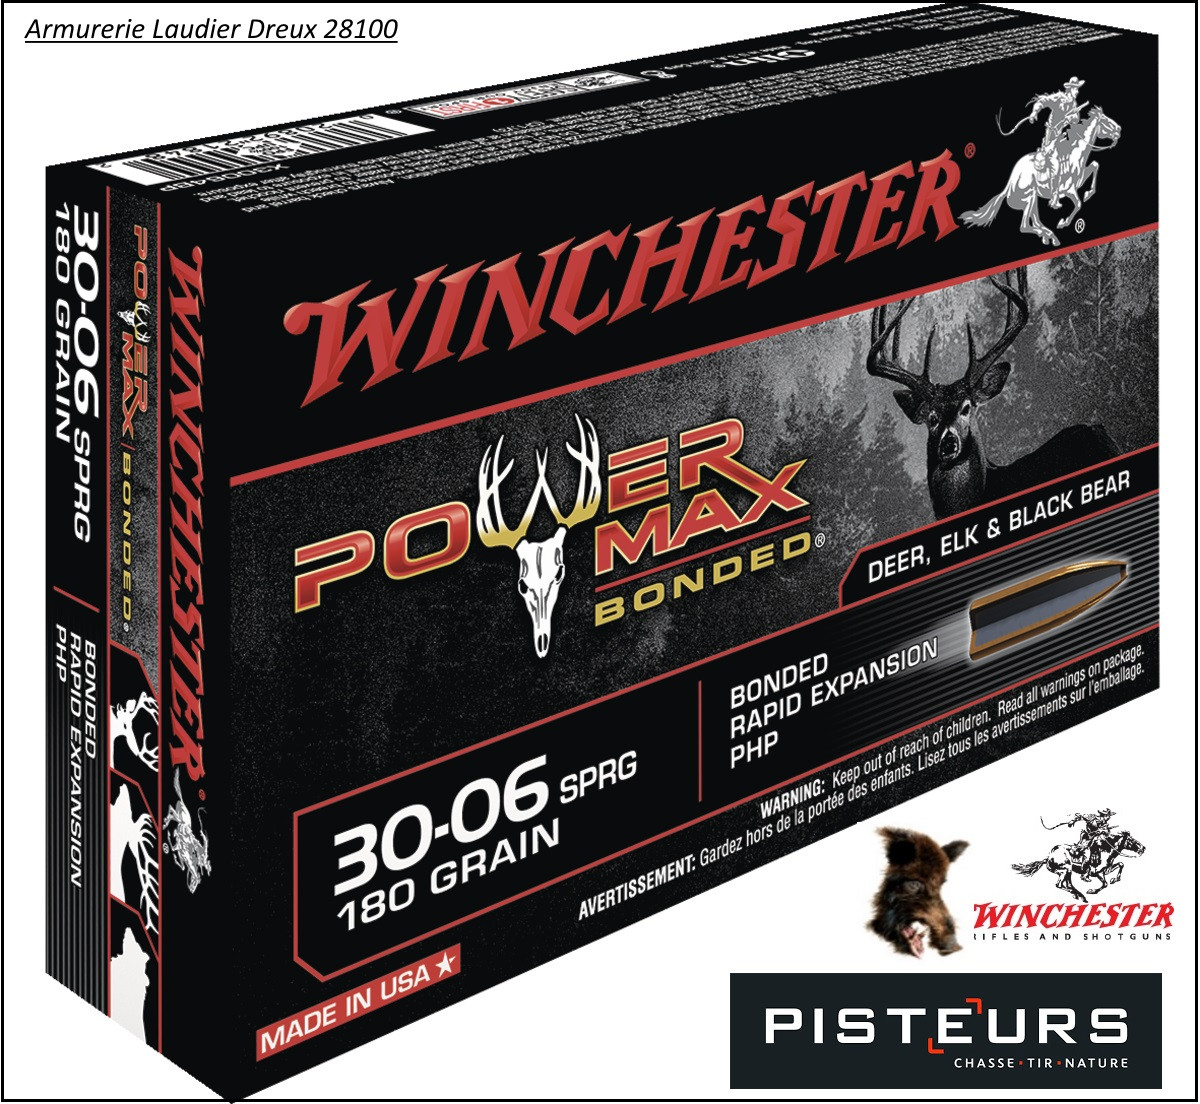 Cartouches grande chasse Winchester Power Max Bonded.---Cal 243w,ou 270w,ou 270wsm,ou7Rem mag,ou30-30,ou 300 winch mag."Promotions"